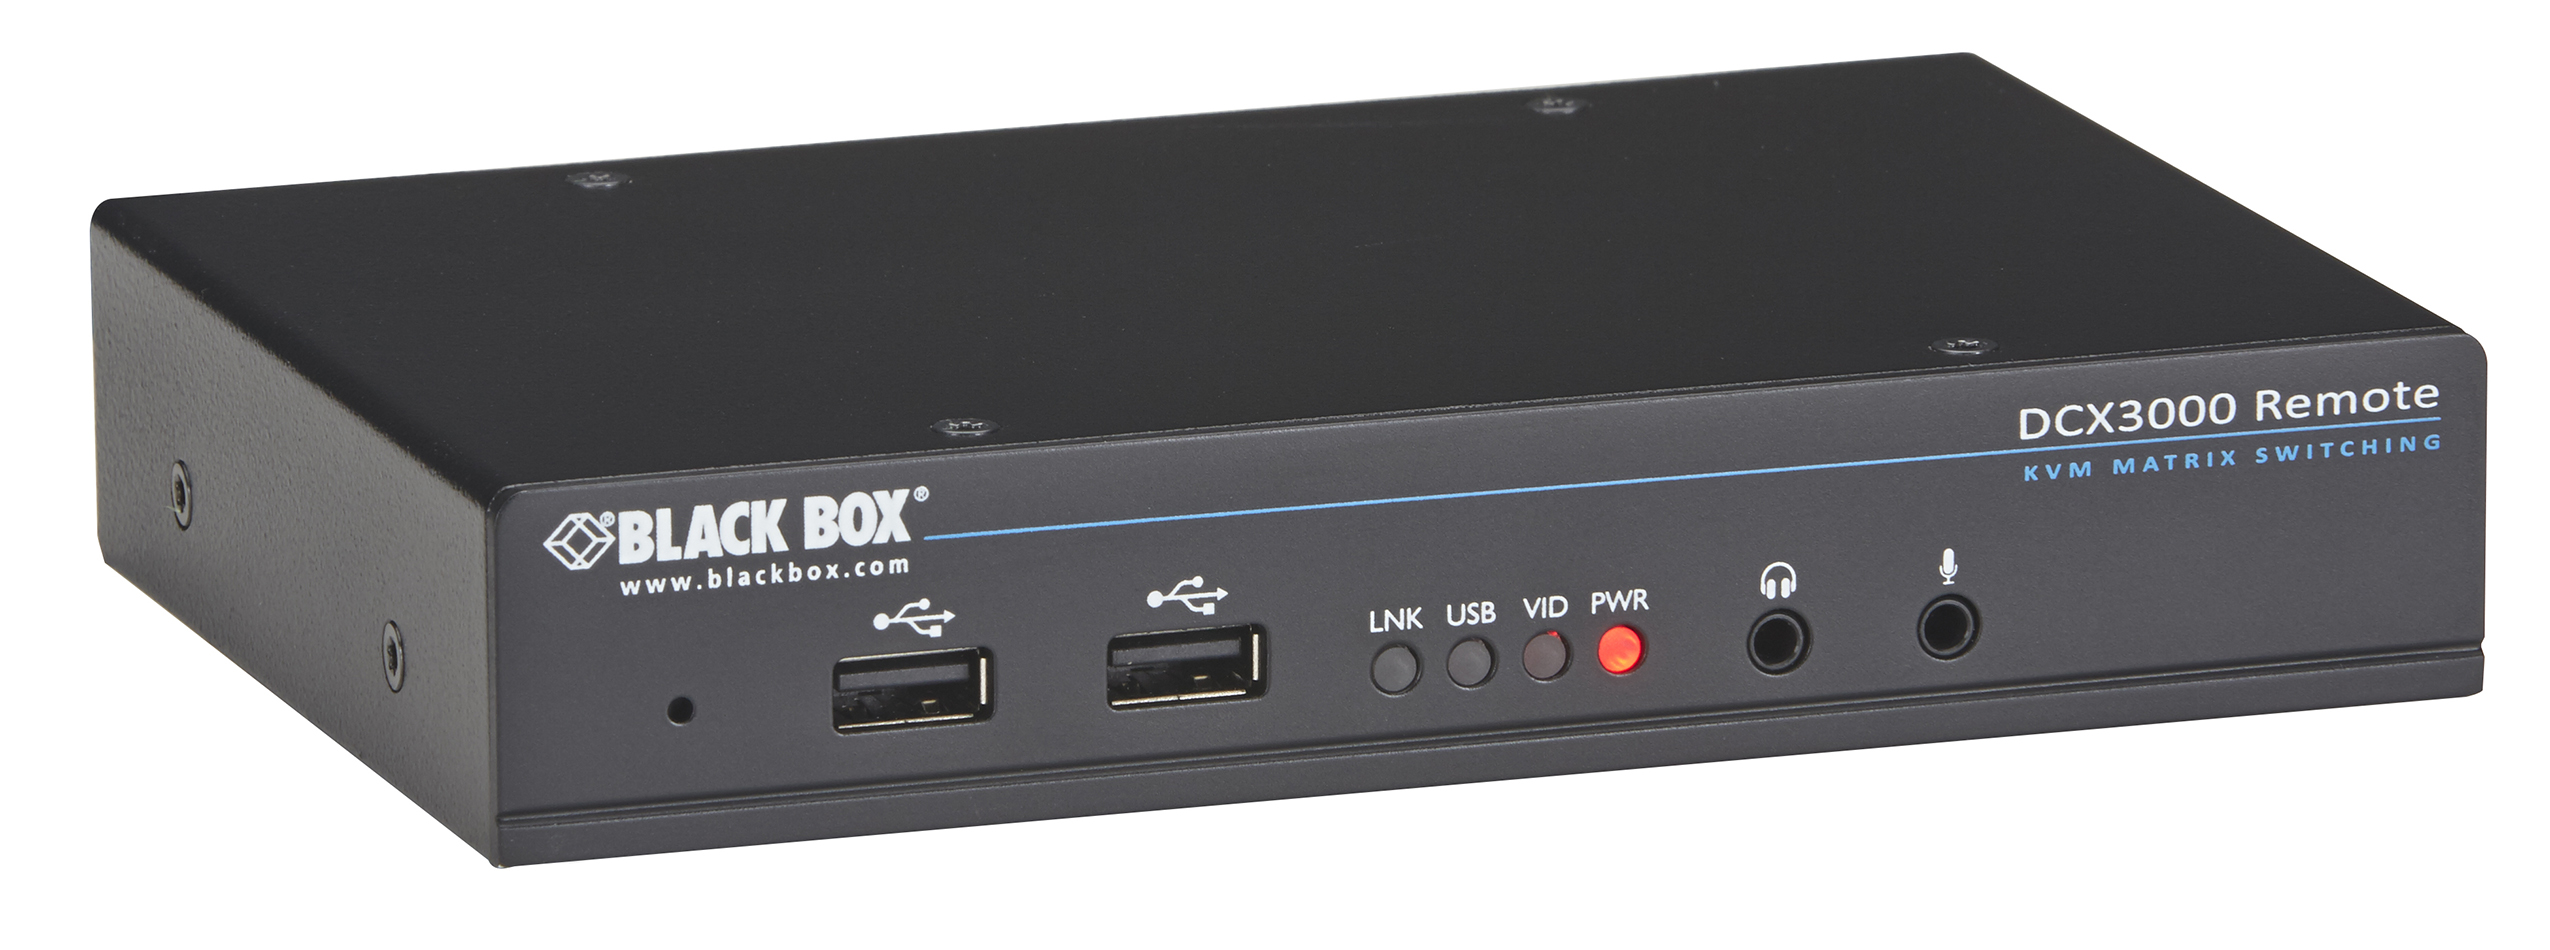 Black Box Network Services DCX3000-DVR Receiver Units For The High